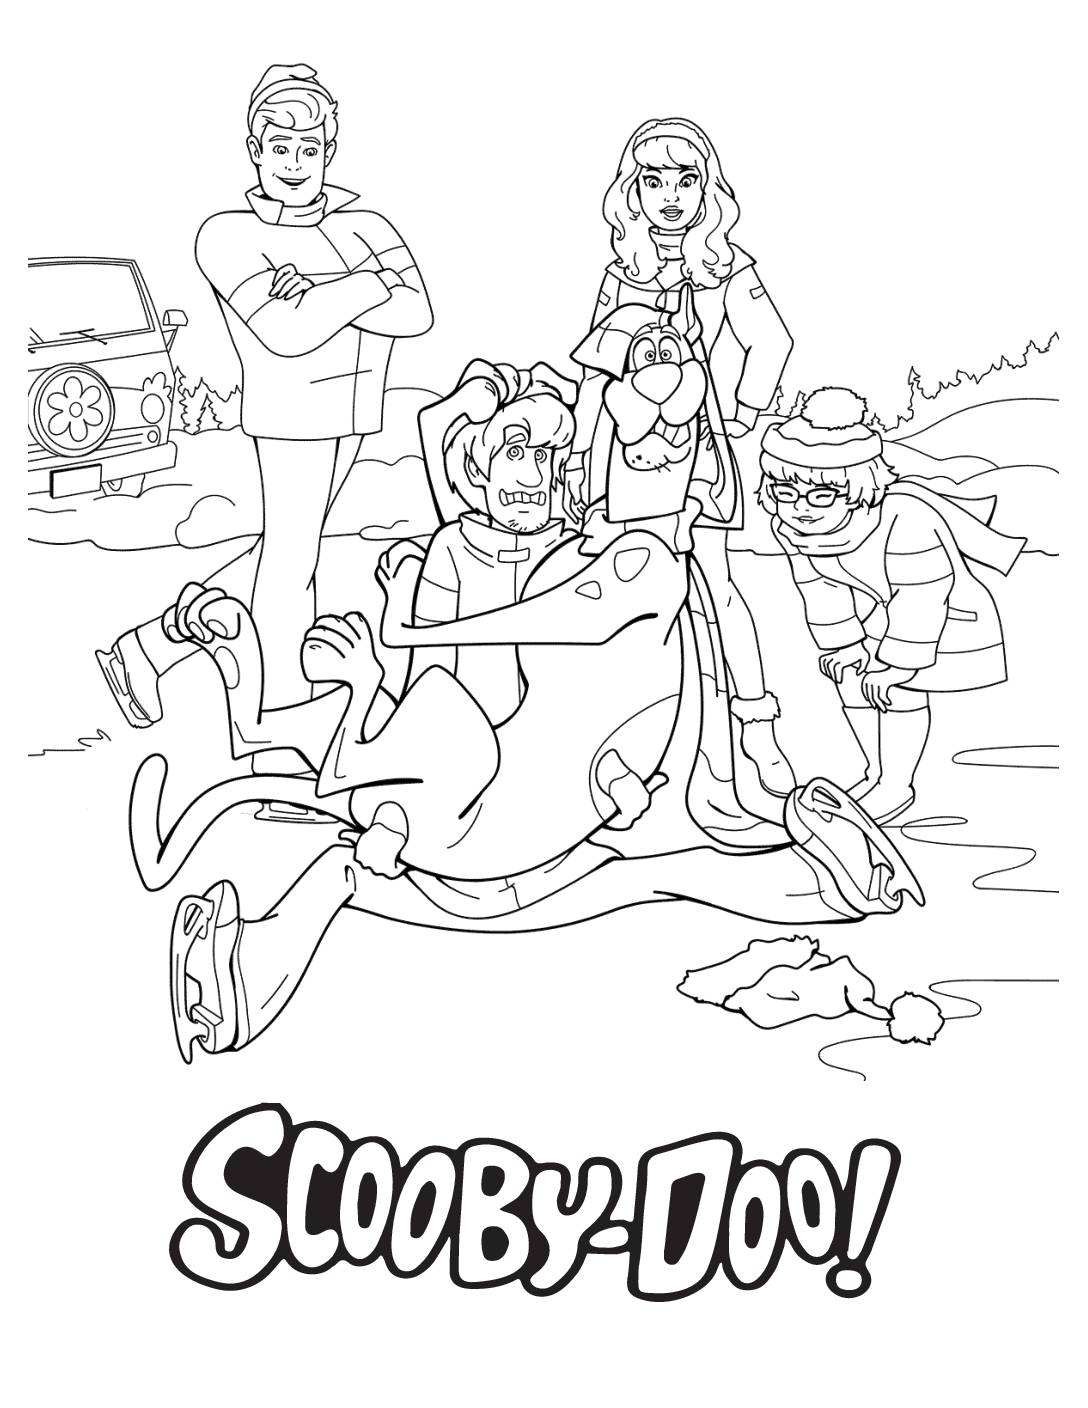 Coloring Page 5 Scooby Doo Coloring Pages